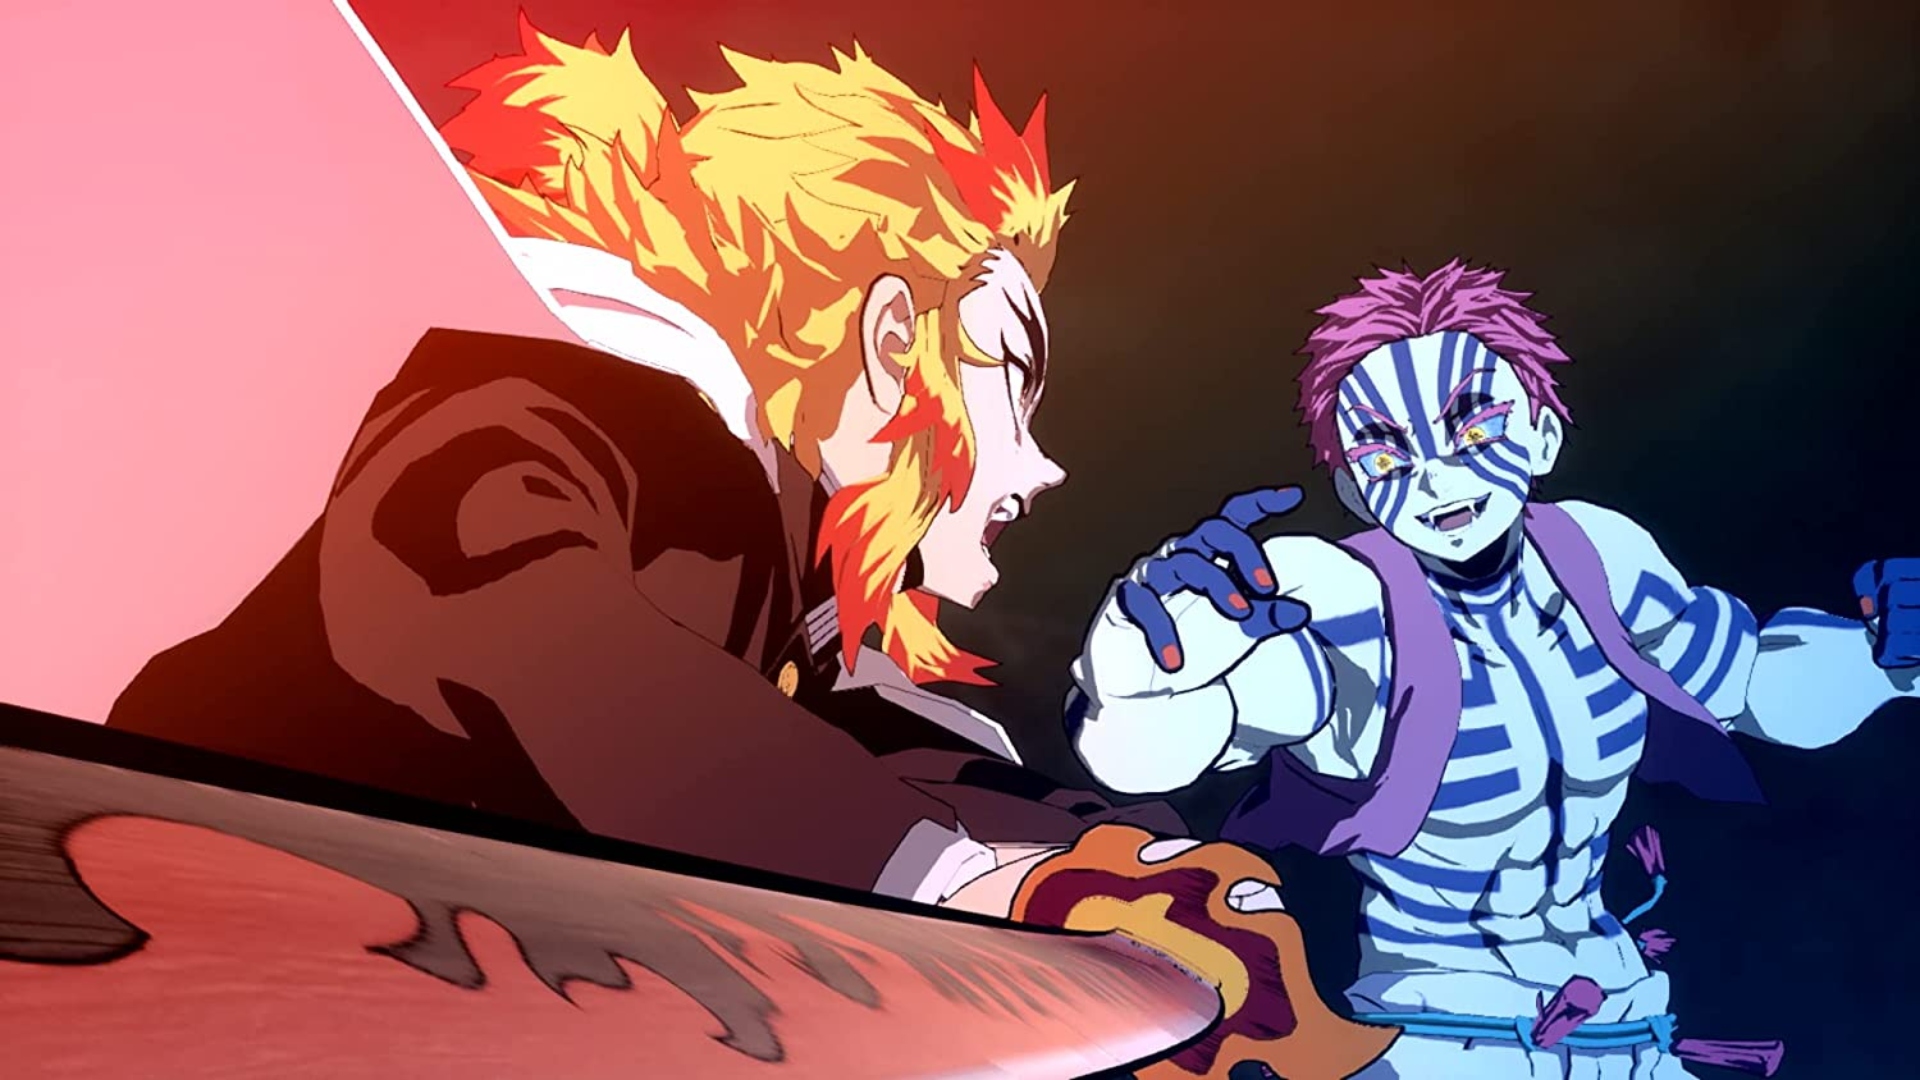 A demon slayeer with fire-red hair fighting a purple demon